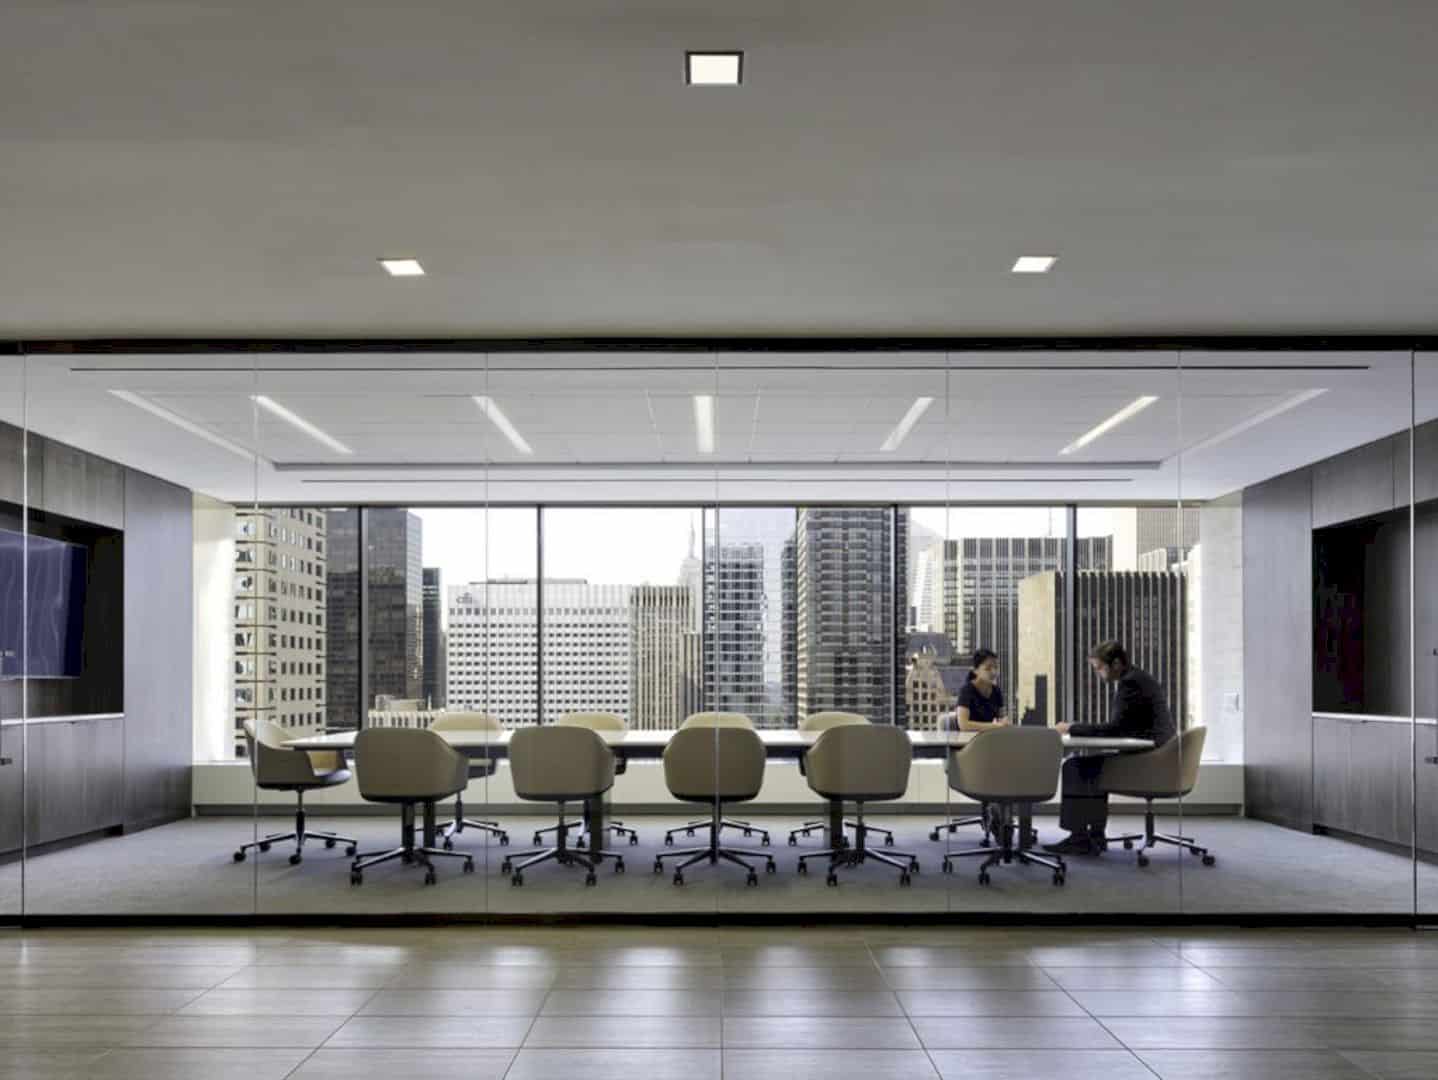 Central Park Office The Office Renovation Project To Increase Natural Light Exposure And Park Views 4